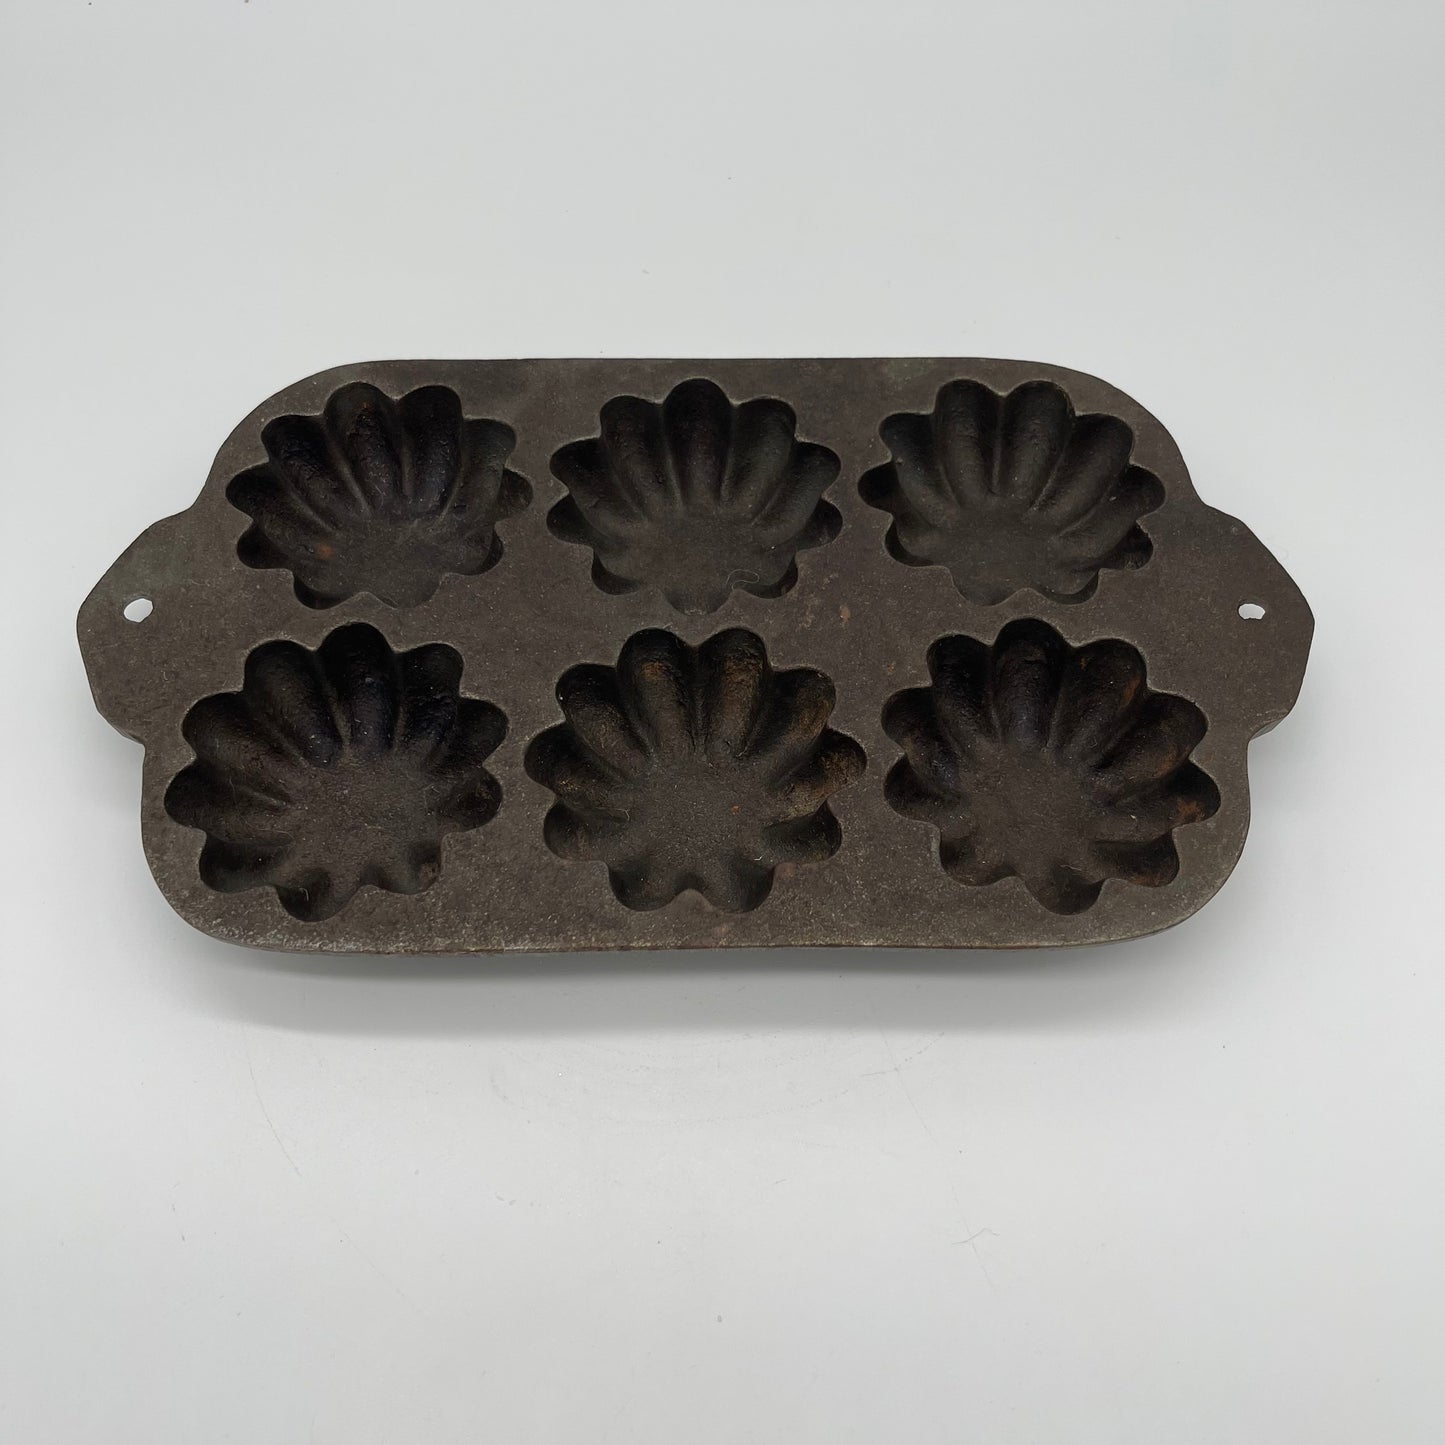 Cast Iron Muffin Pan (Item Number 0169)